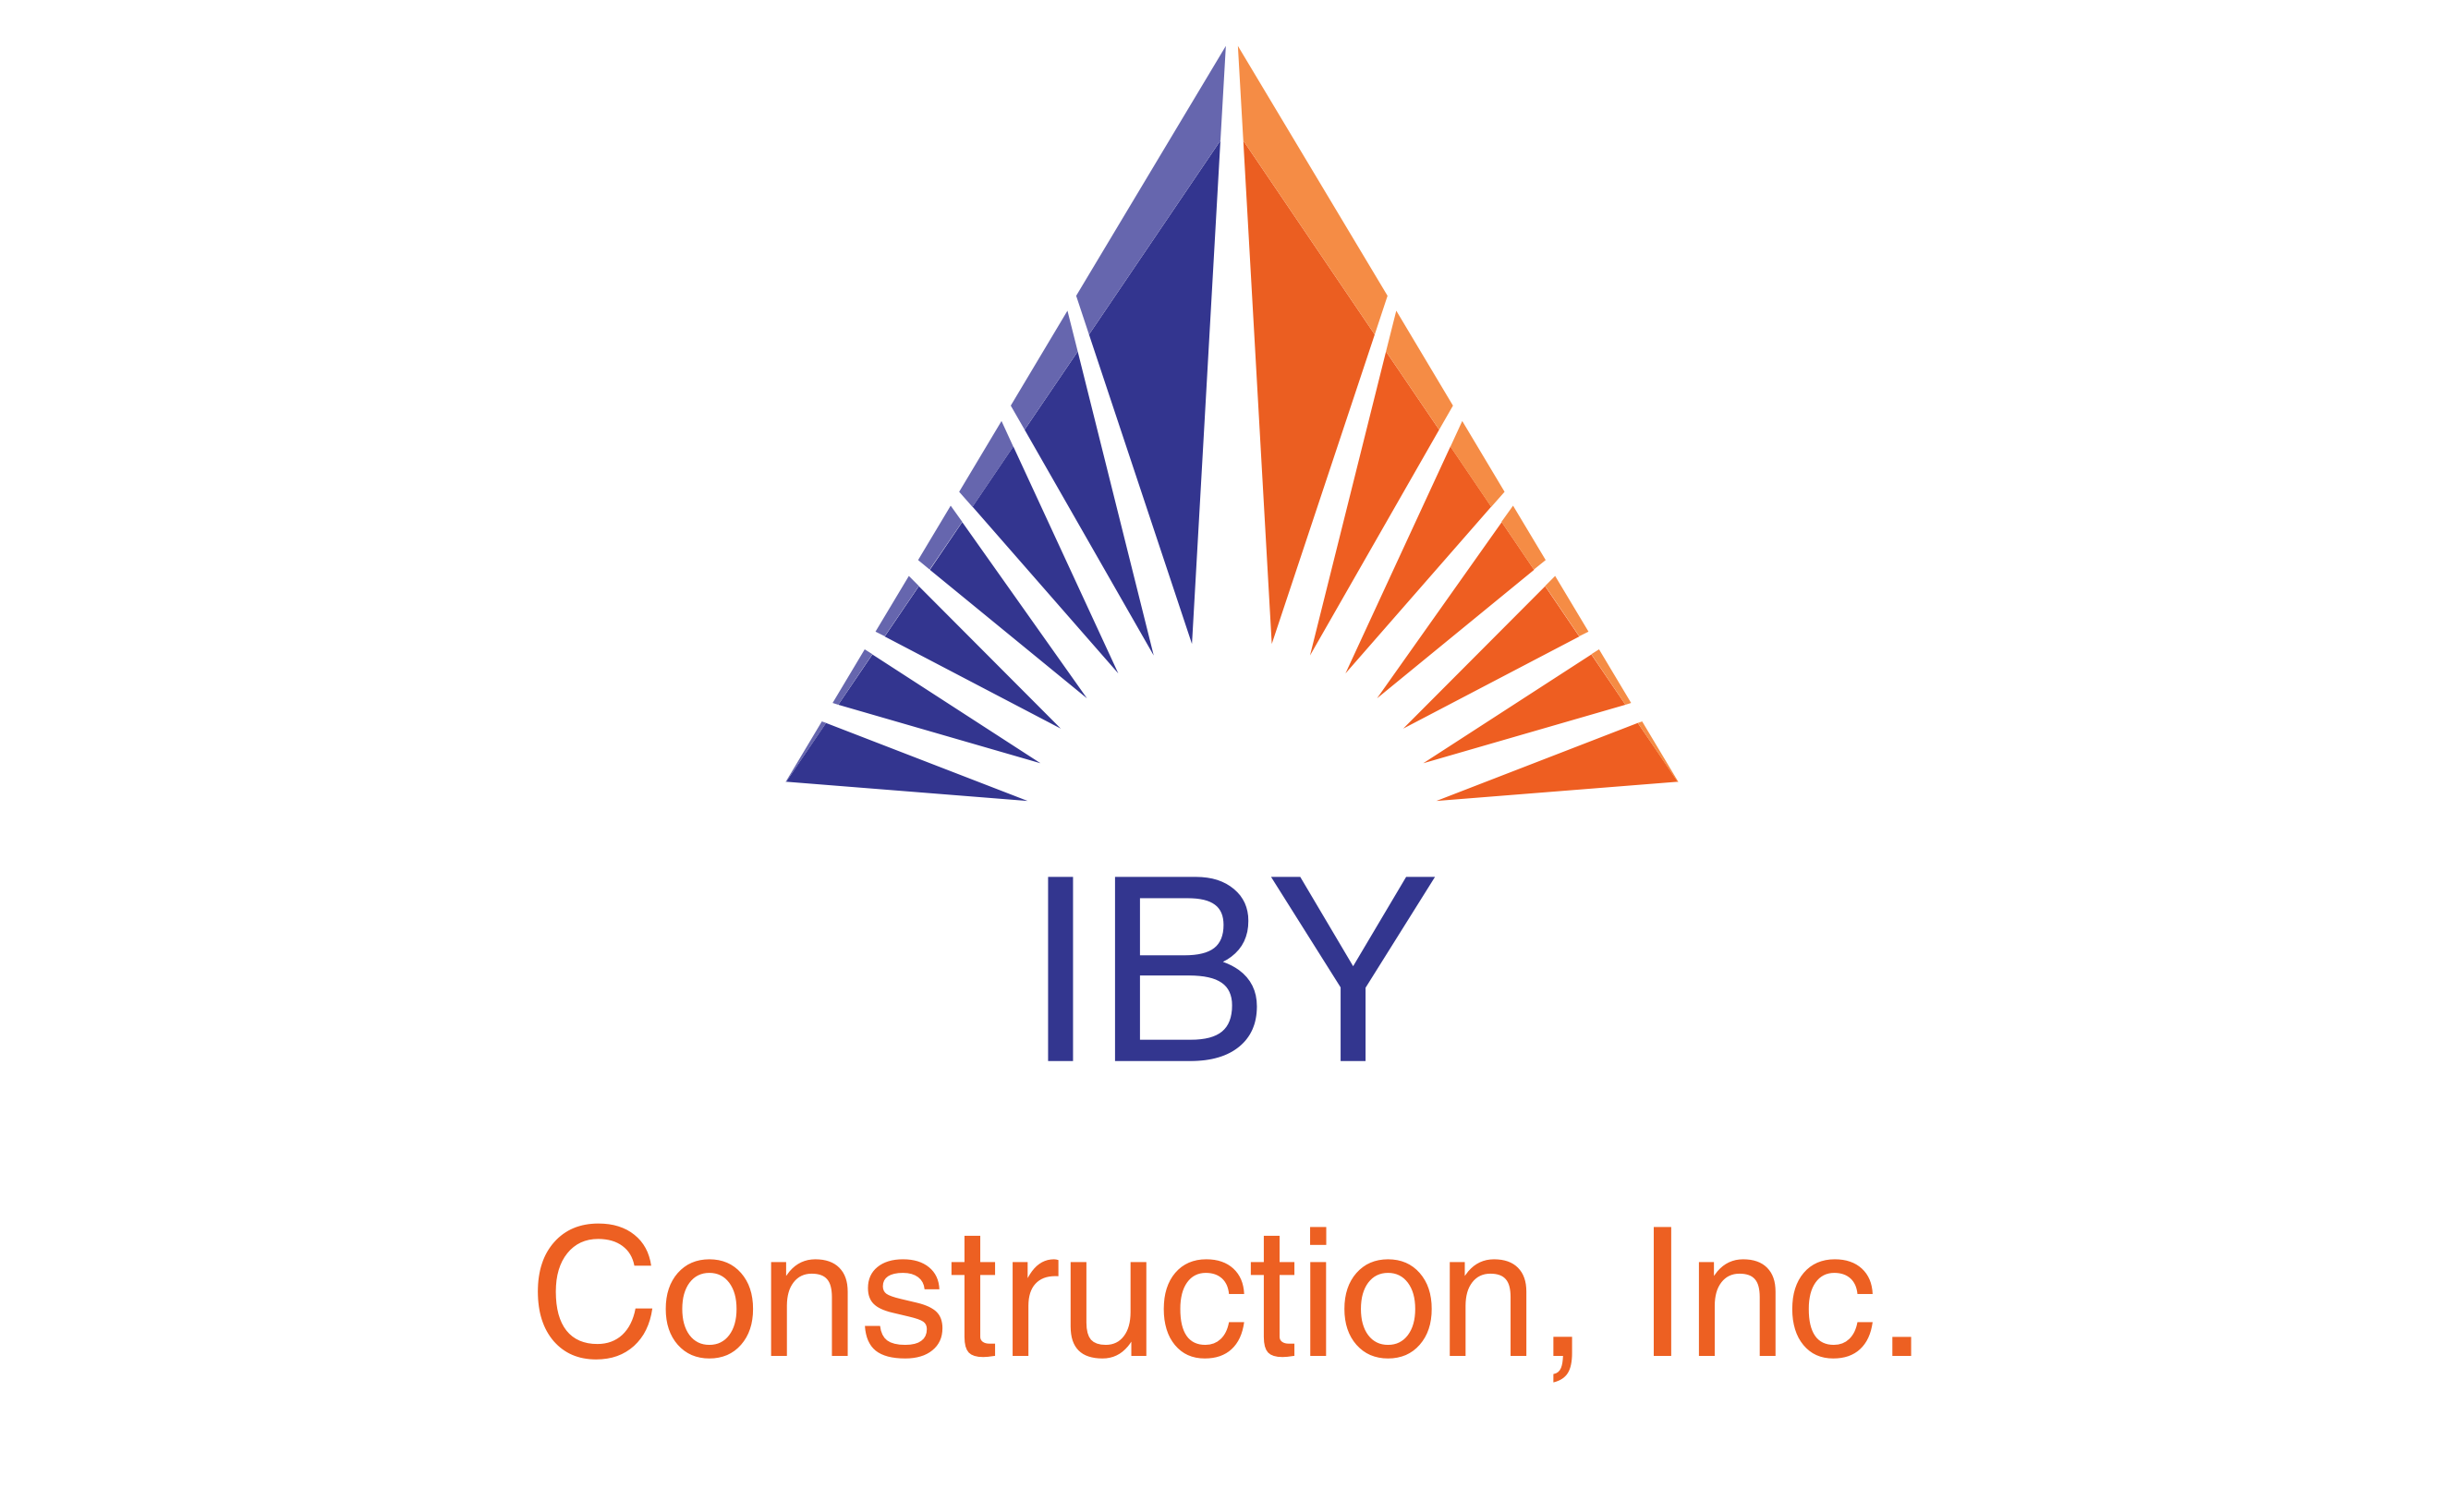 IBY Construction, Inc., Kitchen Remodeling Contractor, Bathroom Remodeling Contractor and Flooring Contractor